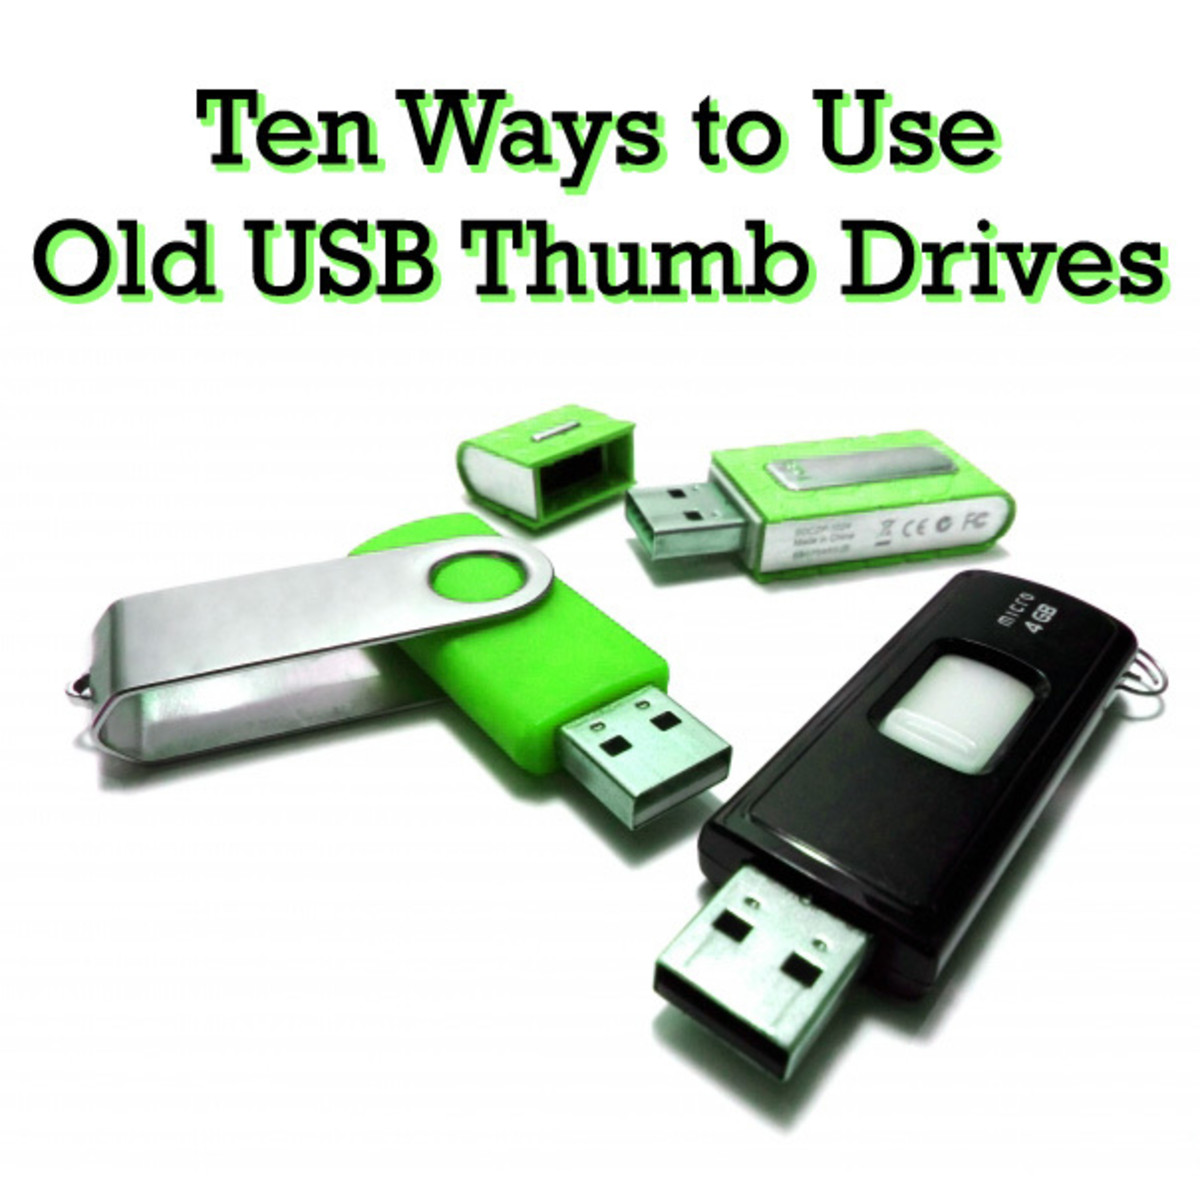 Ten Things to Do With Old USB Thumb Drives